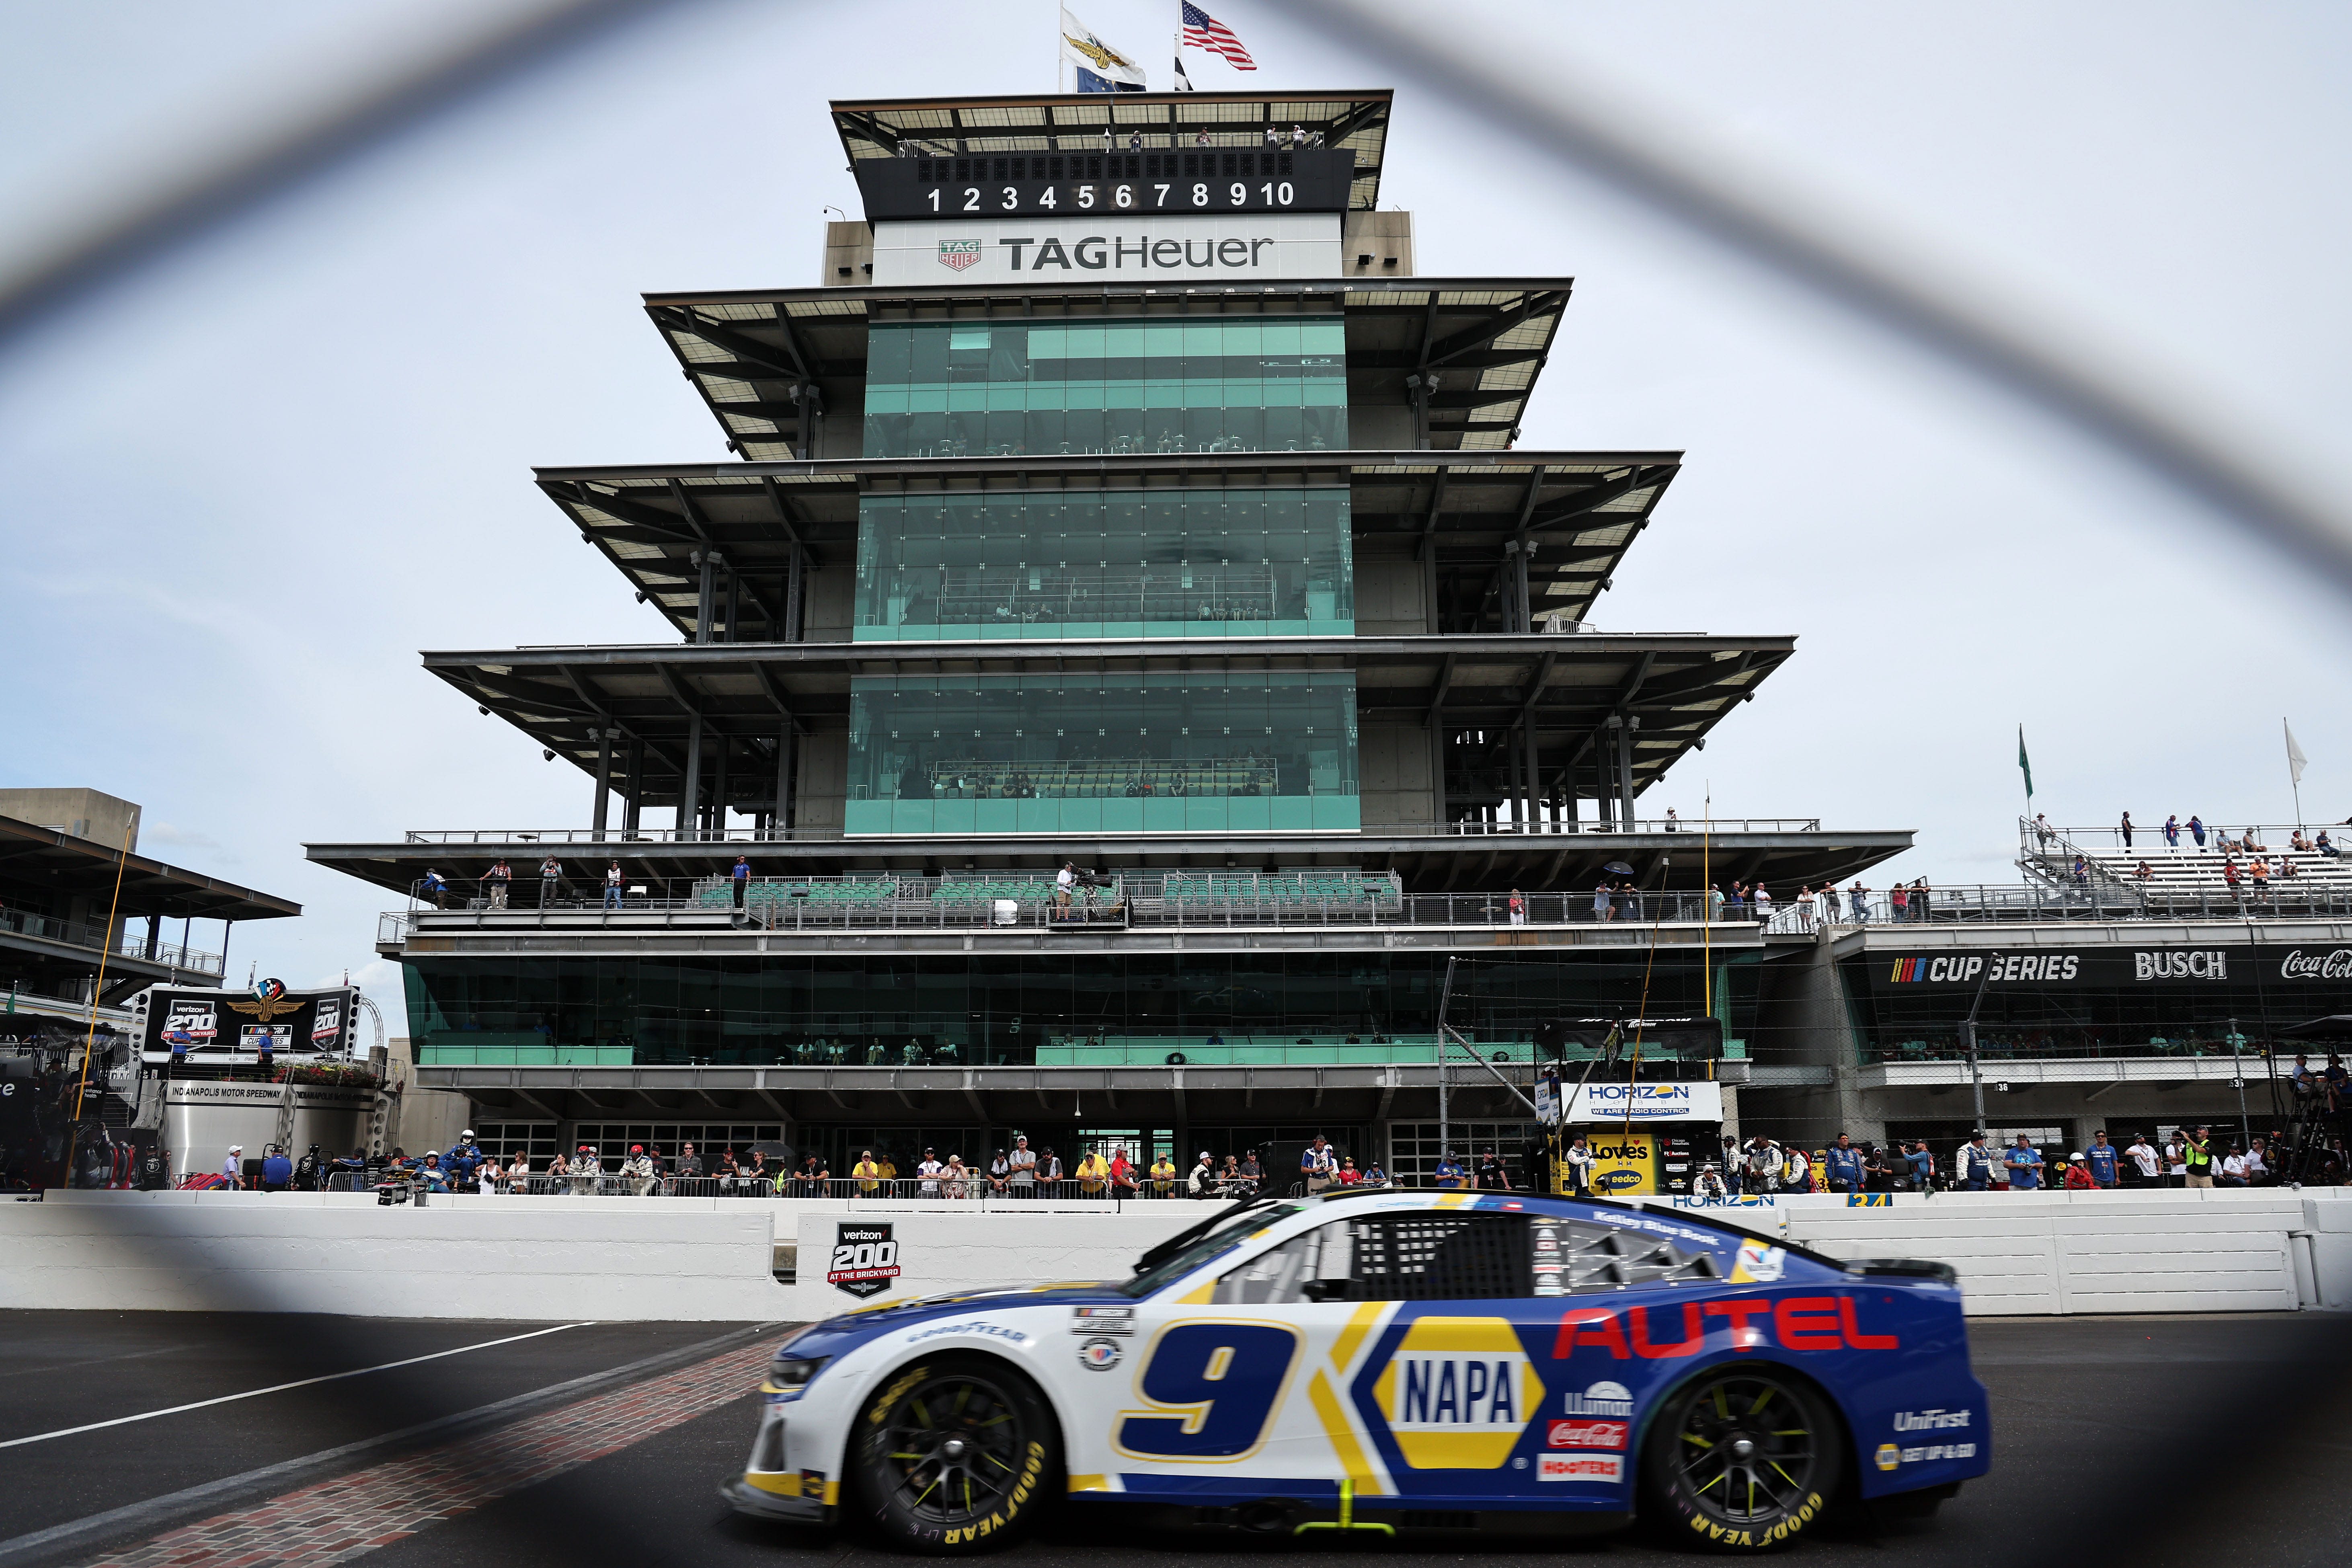 NASCAR Indianapolis full weekend track schedule, TV schedule for Brickyard 400, other races